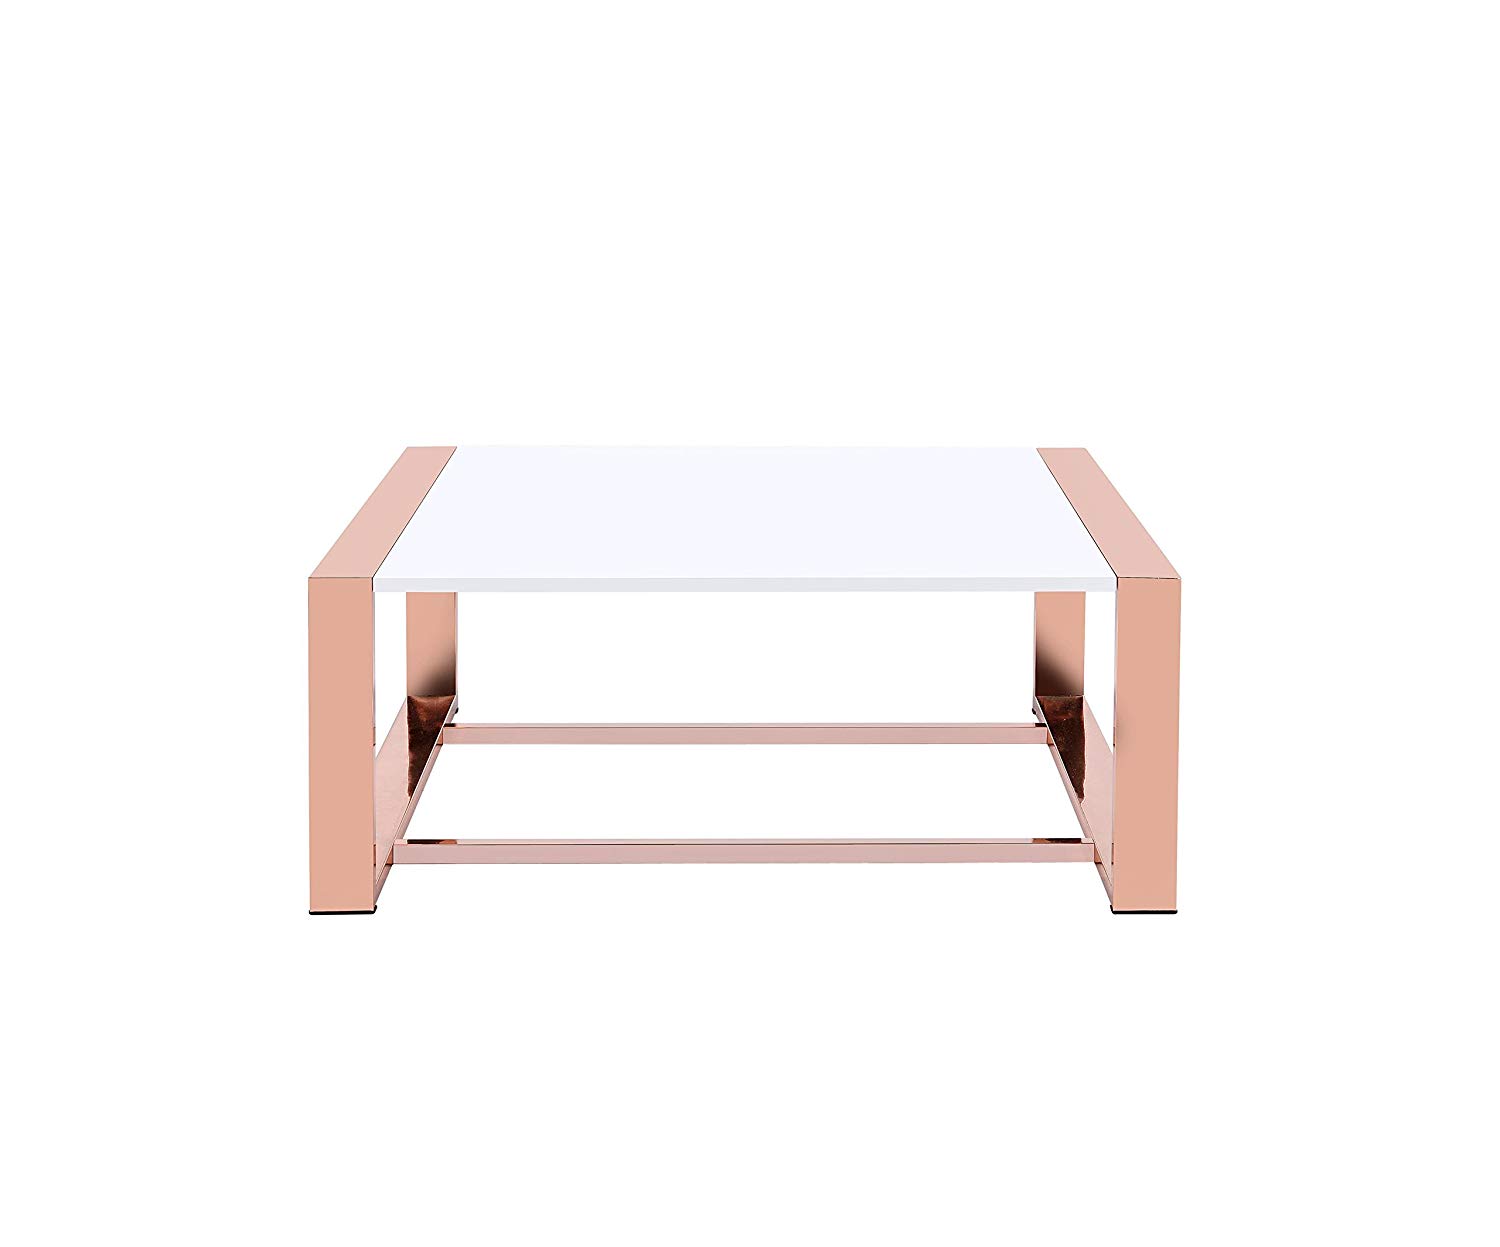 40" X 40" X 16" White High Gloss And Rose Gold Coffee Table